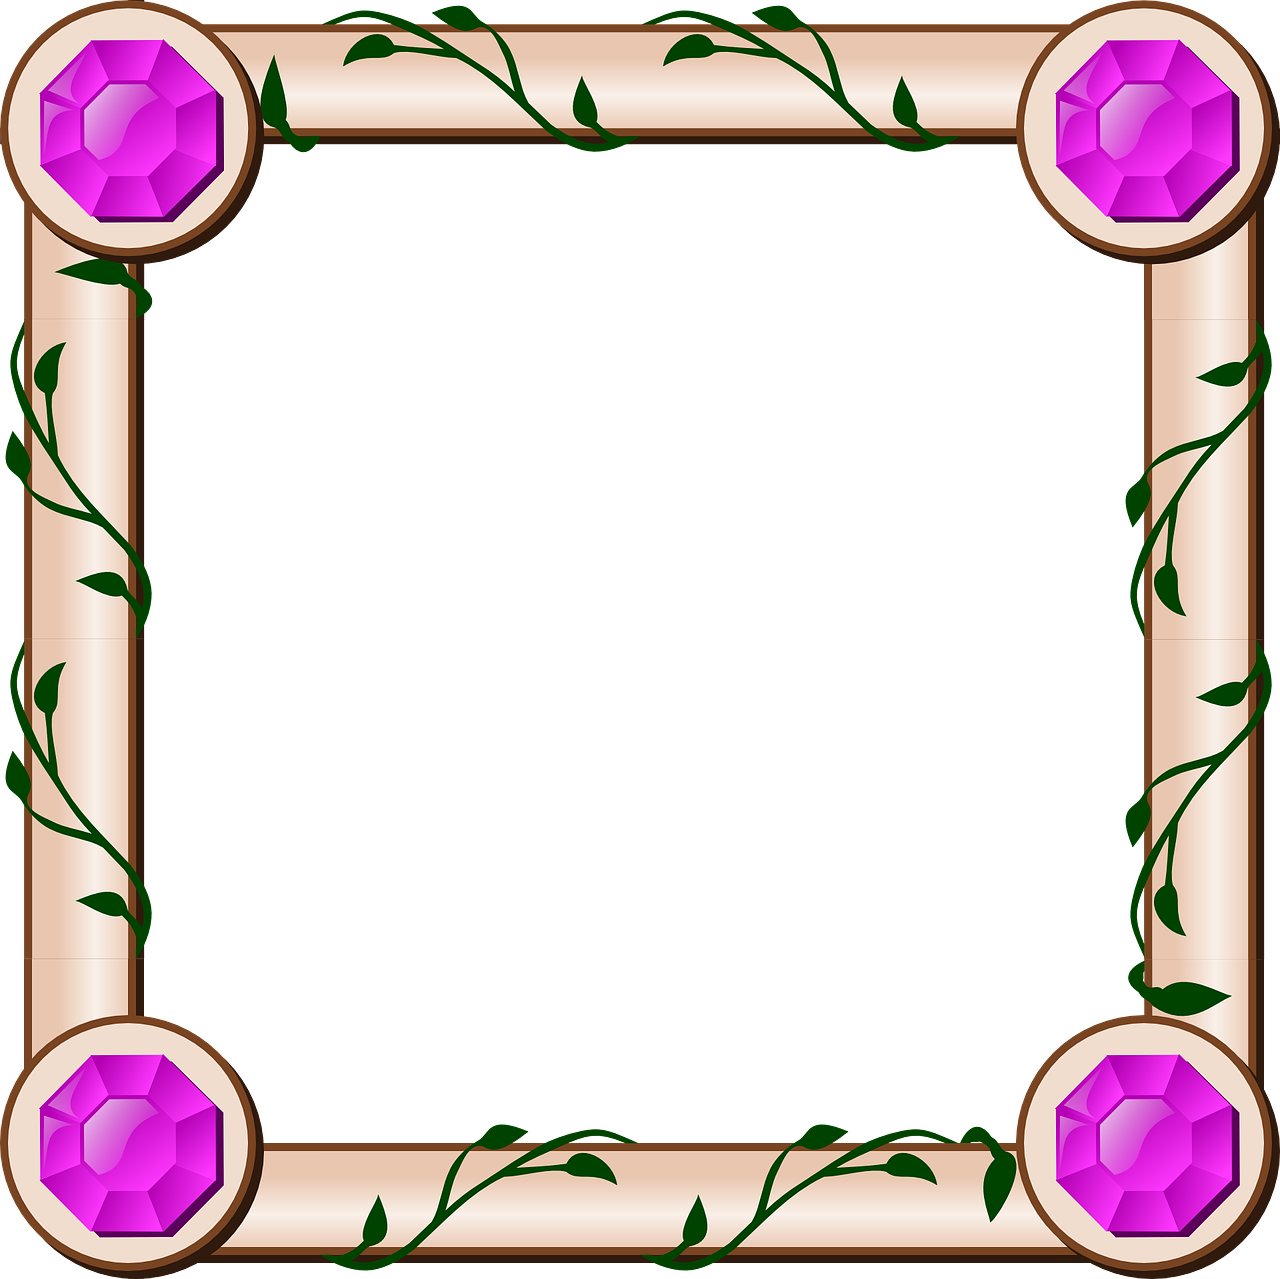 A Frame With Pink Gems And Leaves